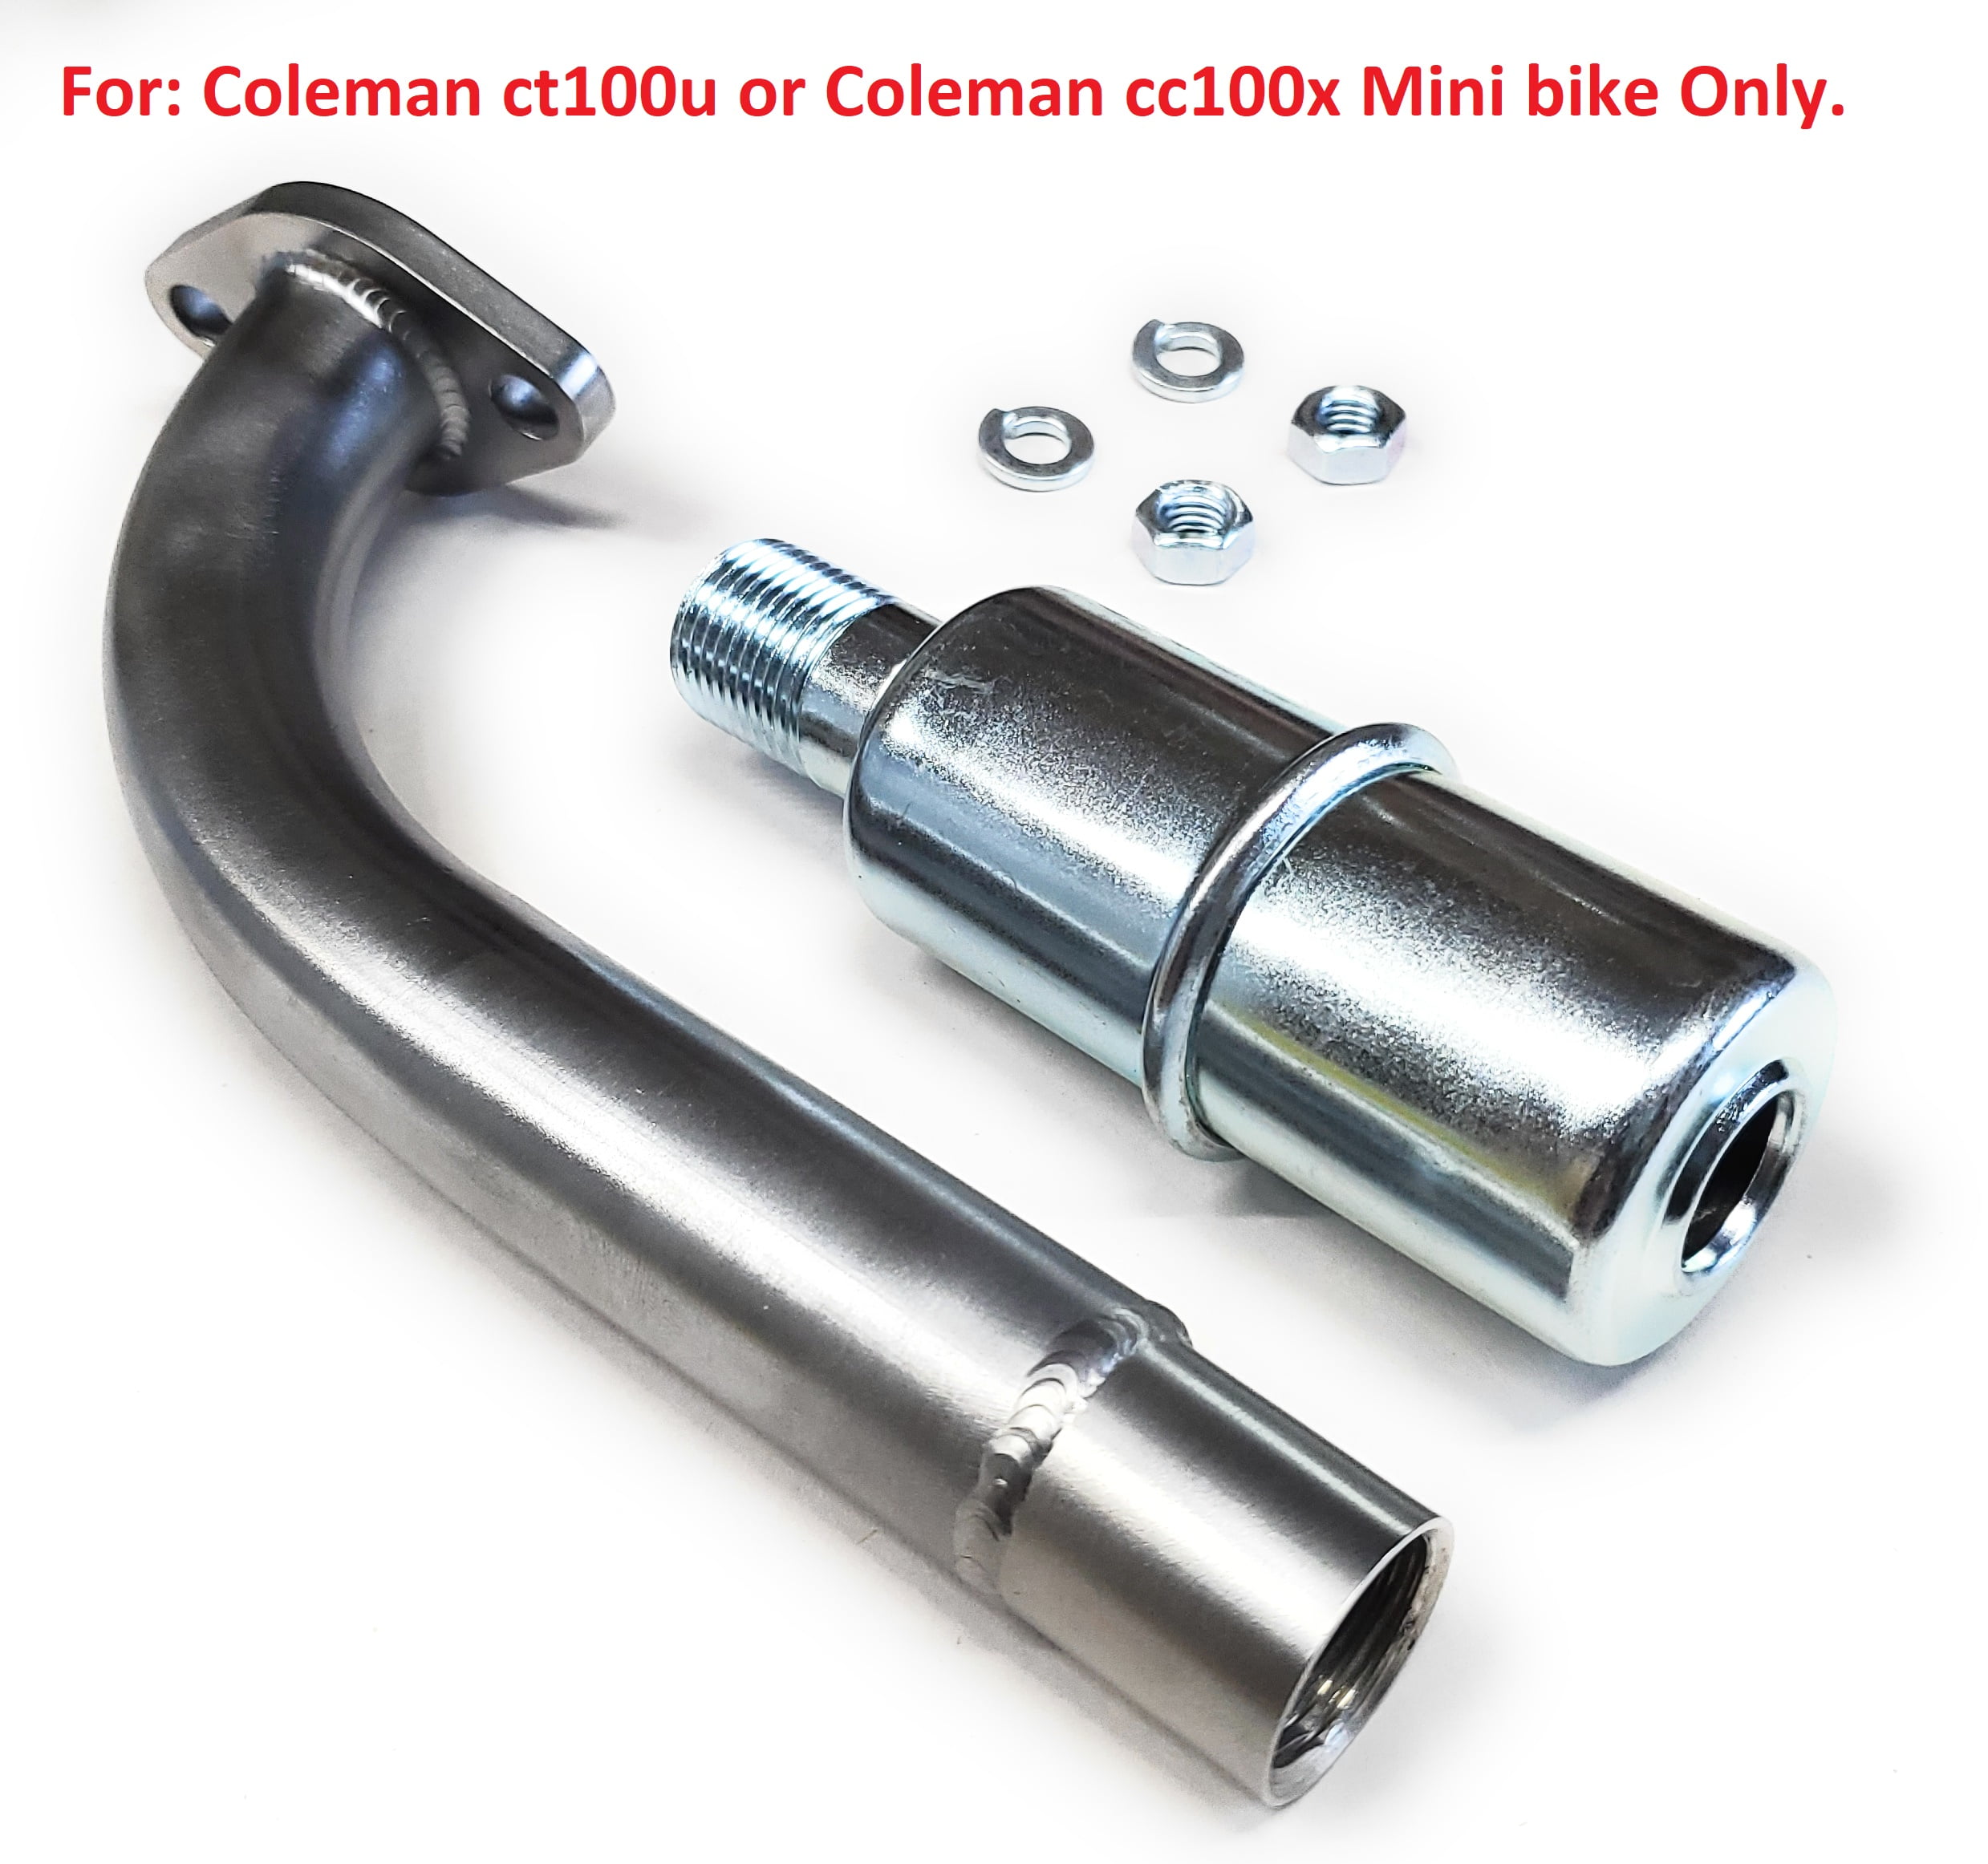 Exhaust With Muffler for: Coleman ct100u or Coleman cc100x Mini bike